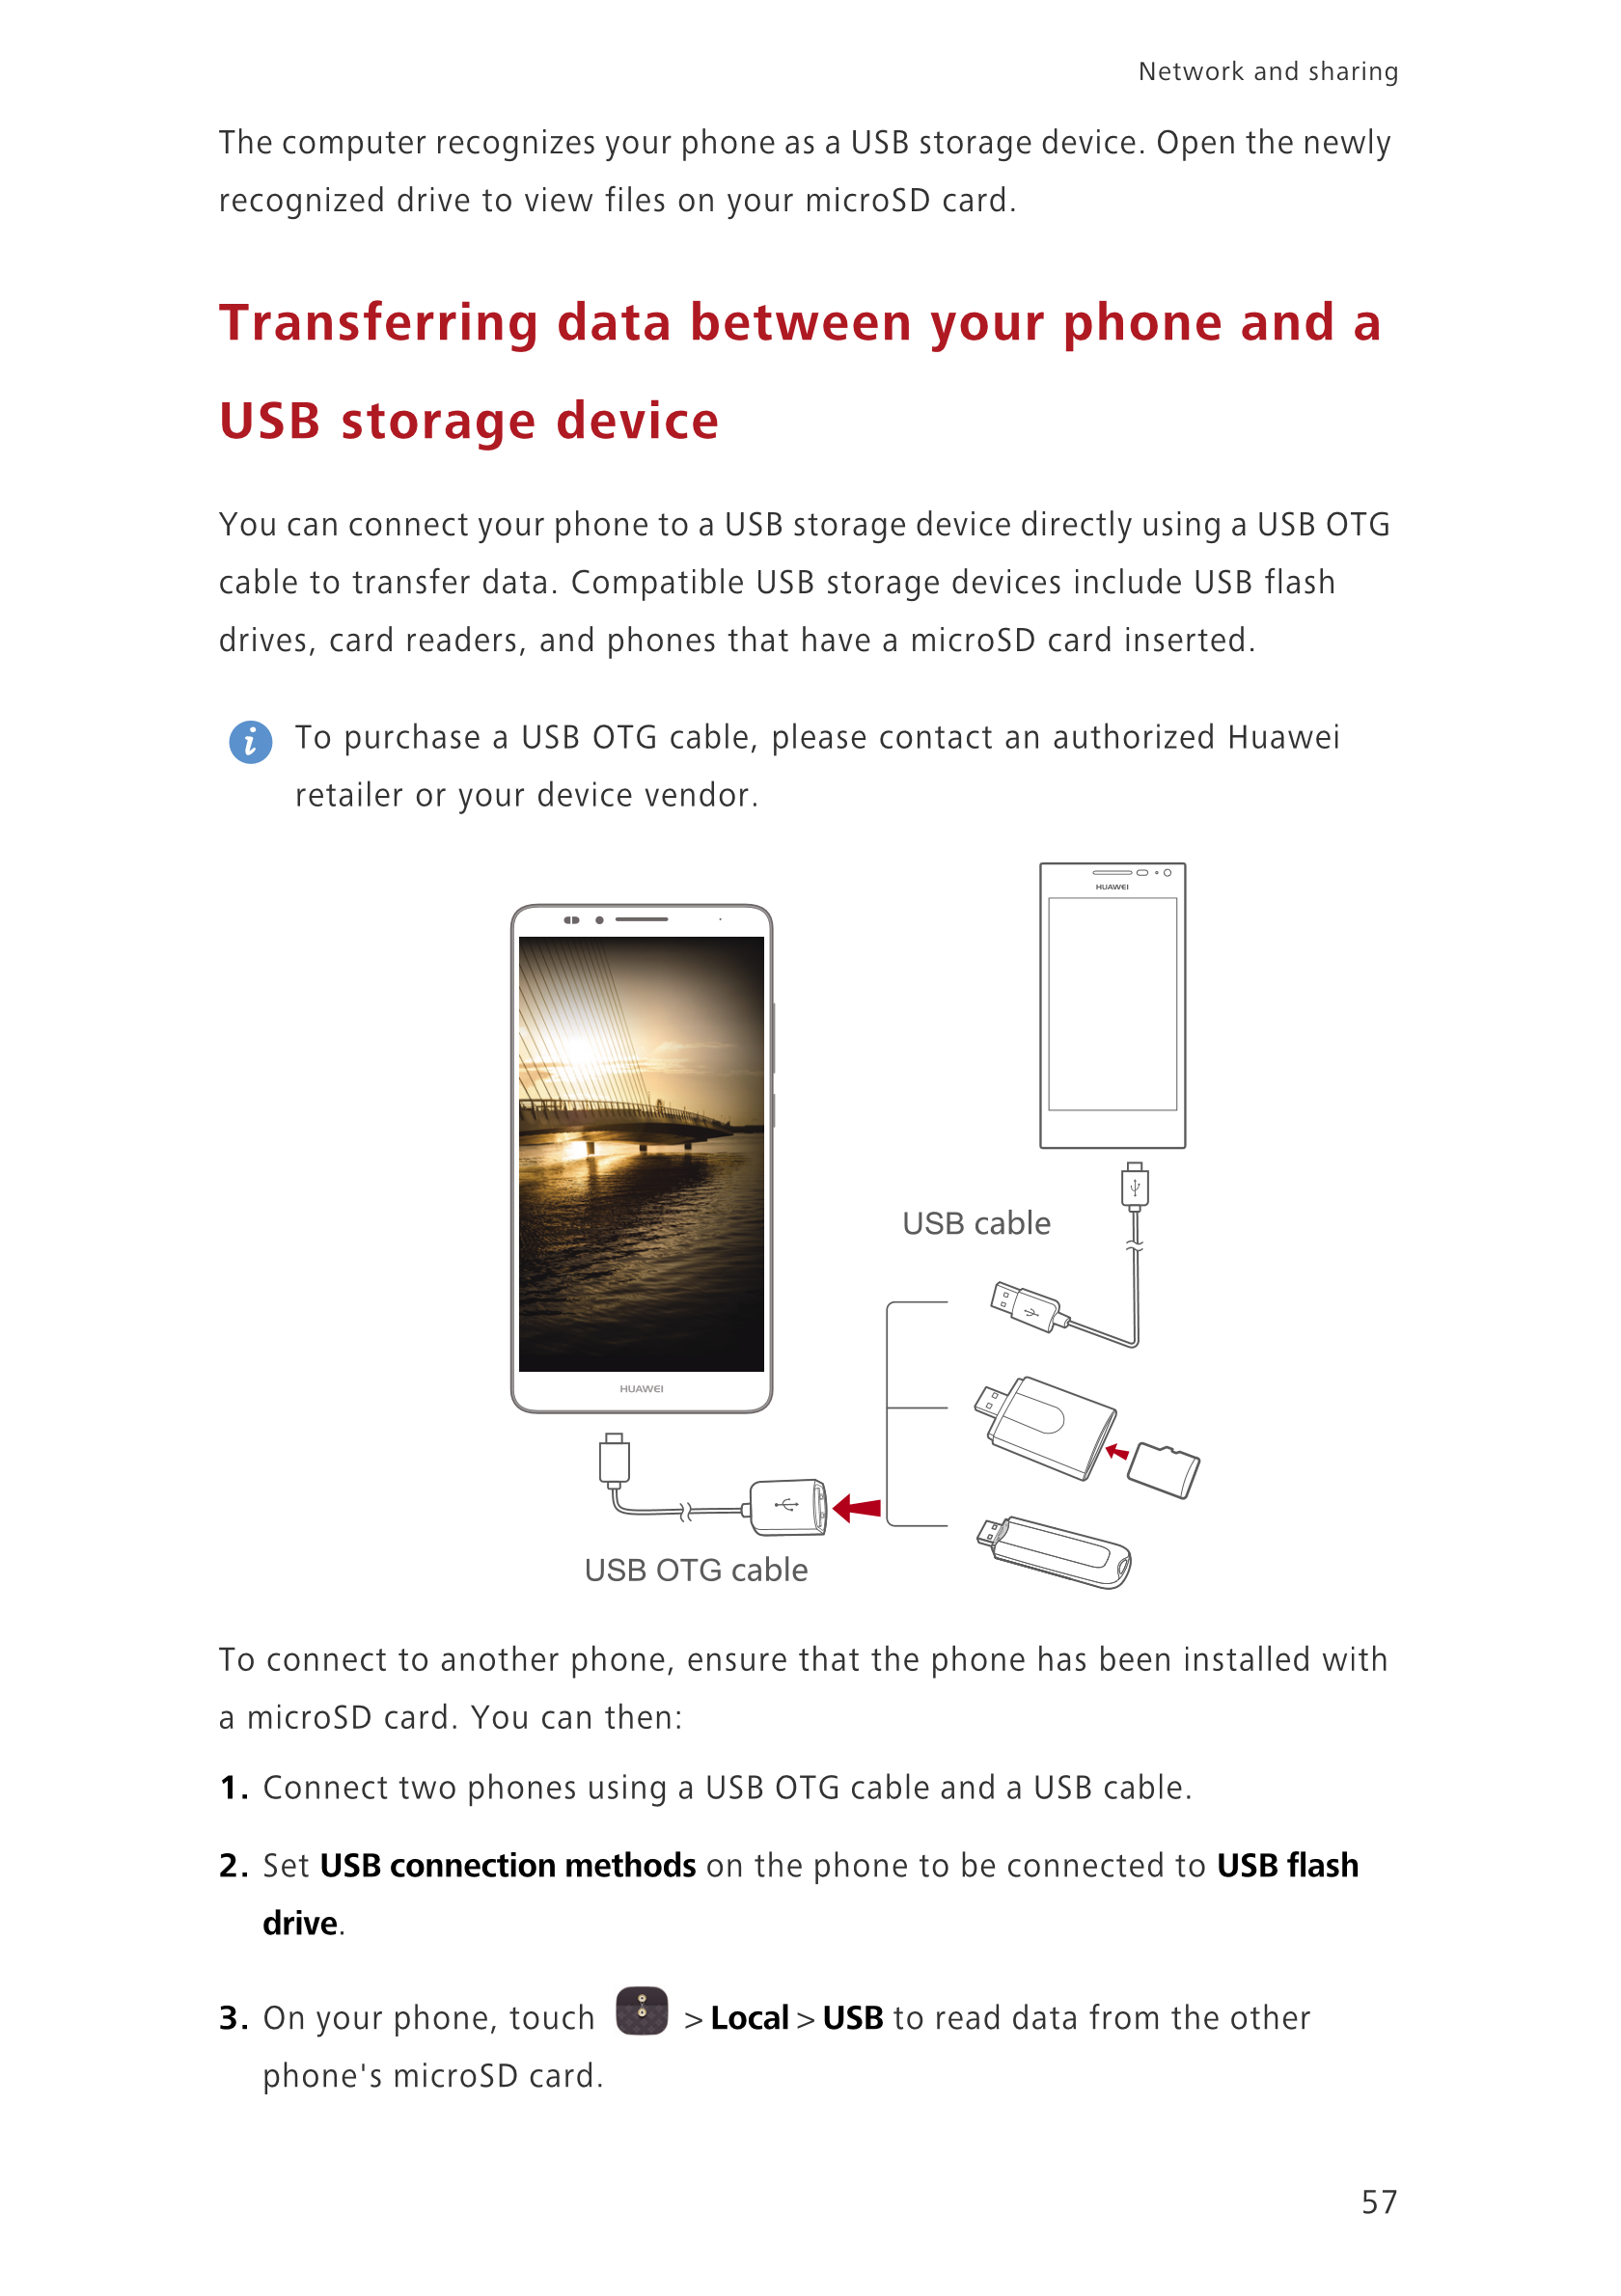 Network and sharing  
The computer recognizes your phone as a USB storage device. Open the newly 
recognized drive to view files